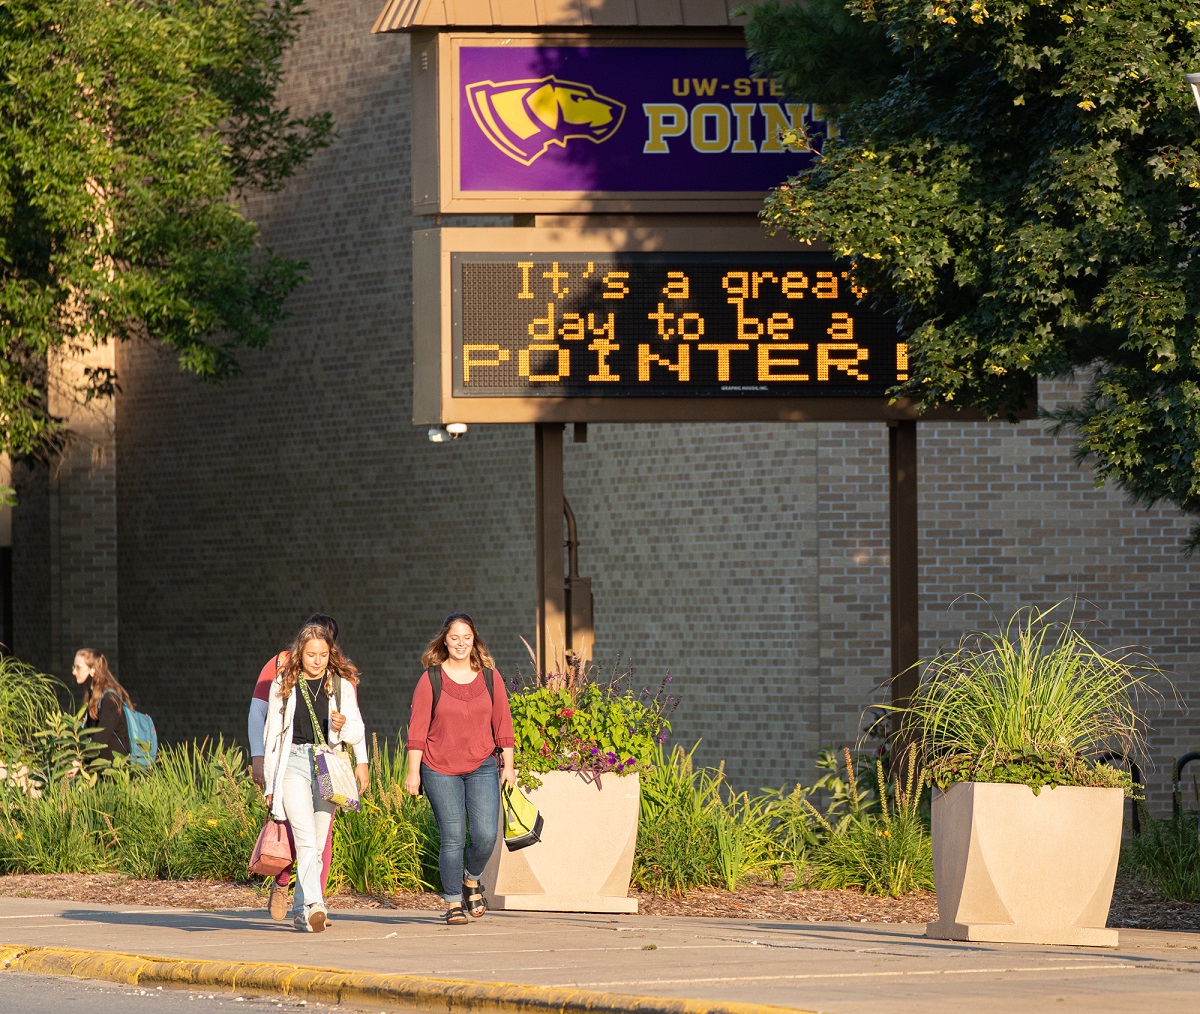 UW-Stevens Point ranked among top Midwest public universities again in 2022